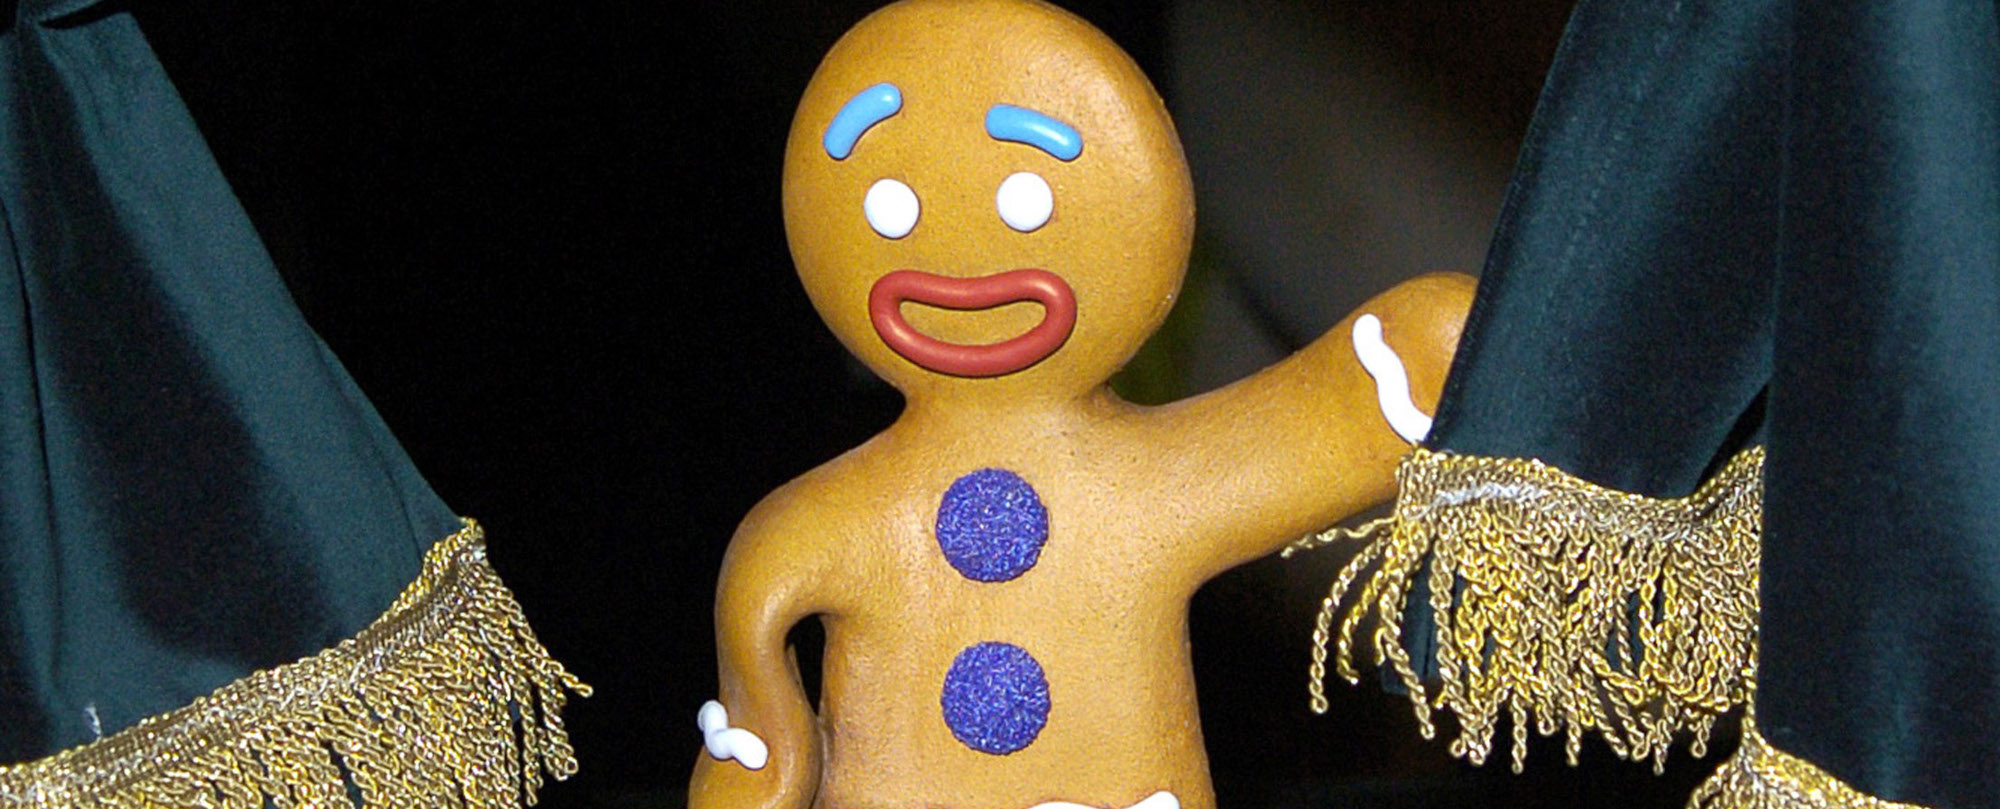 Behind the Meaning of the Elusive Nursery Rhyme, “The Gingerbread Man”